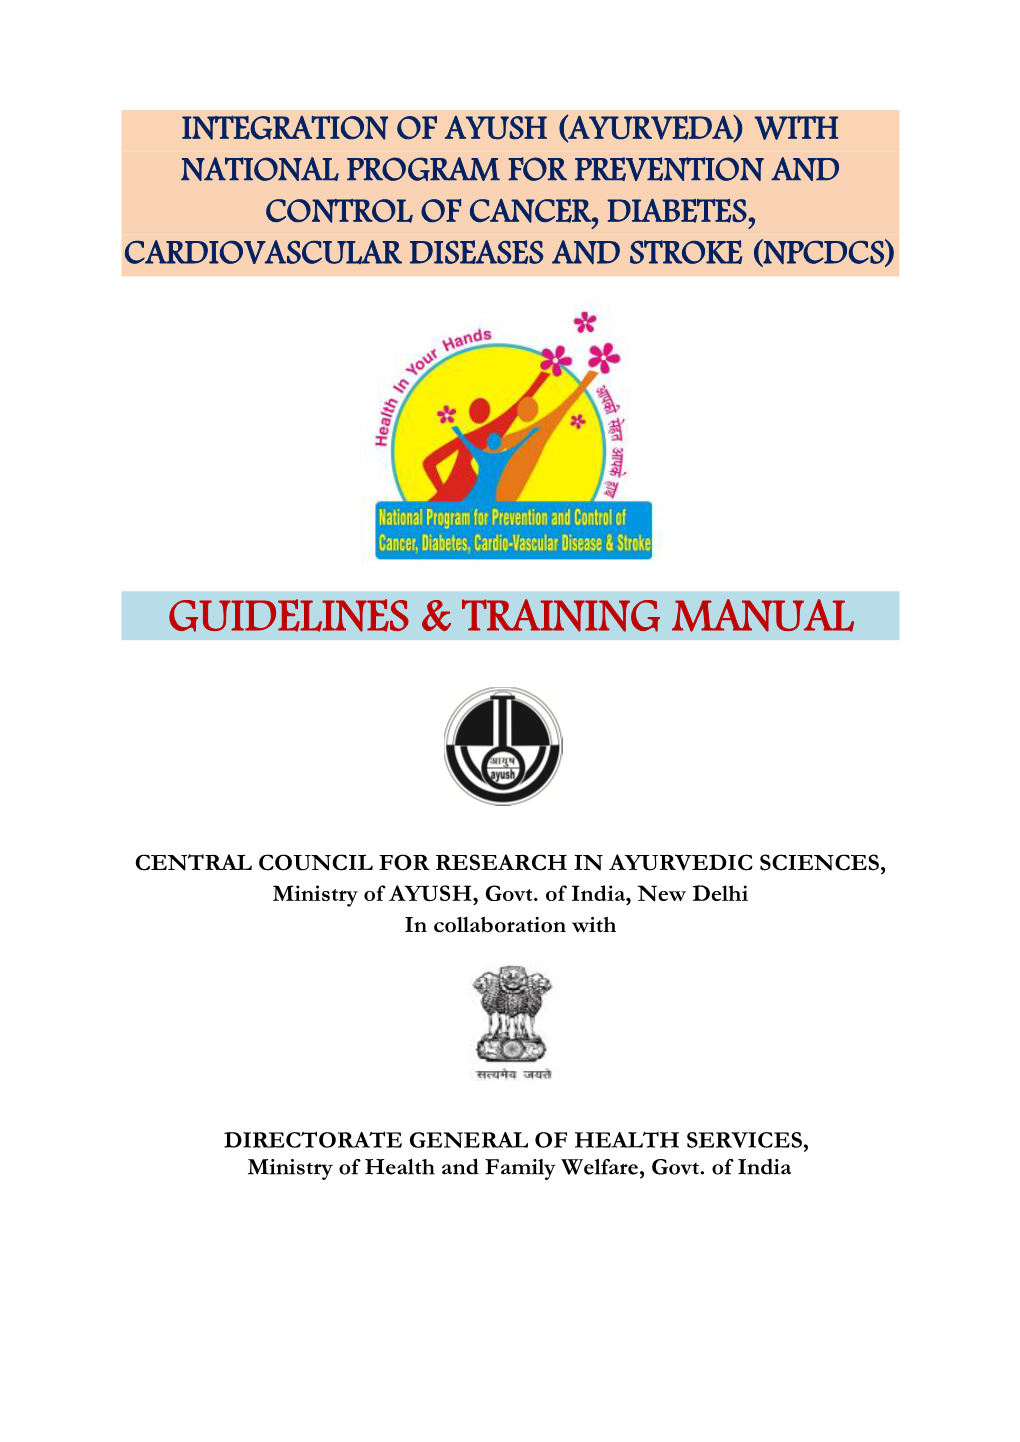 Guidelines & Training Manual